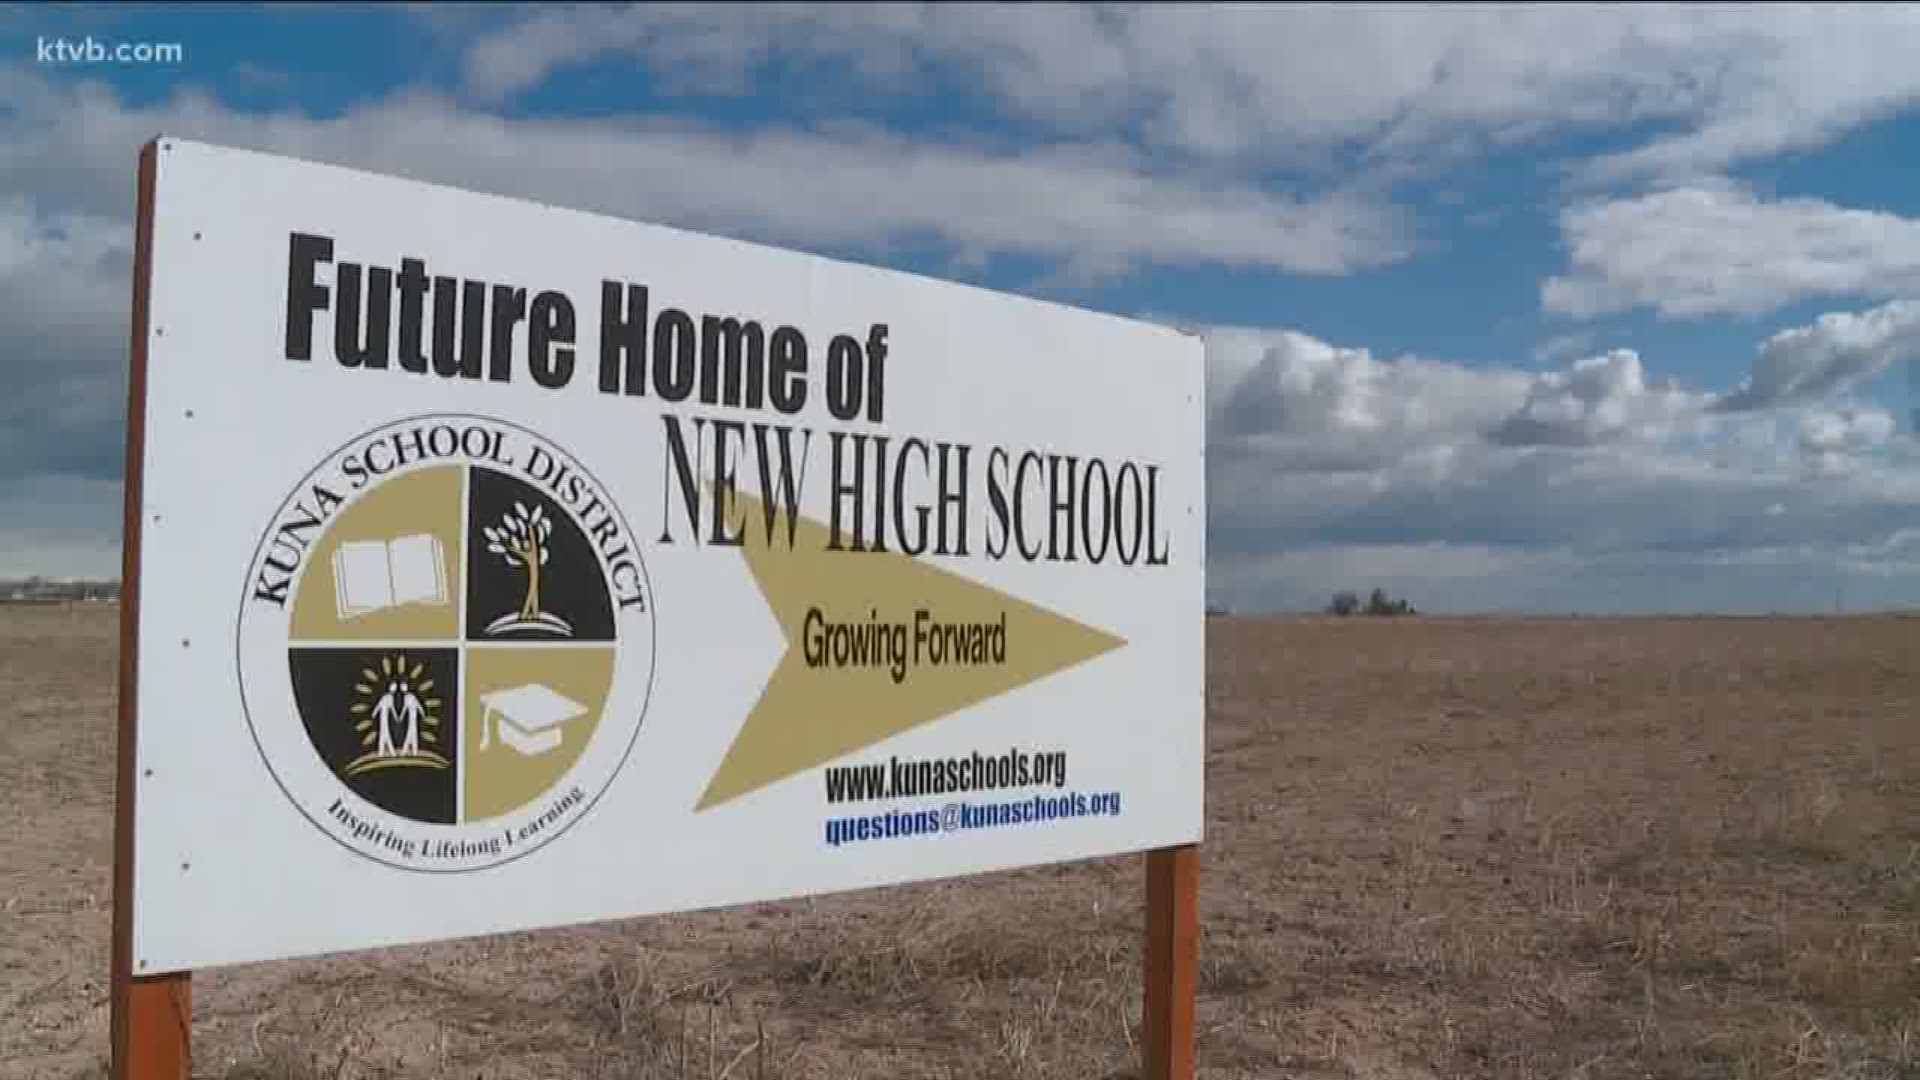 Like much of Idaho, Kuna is seeing a lot of growth and its school district is having to expand to keep up.